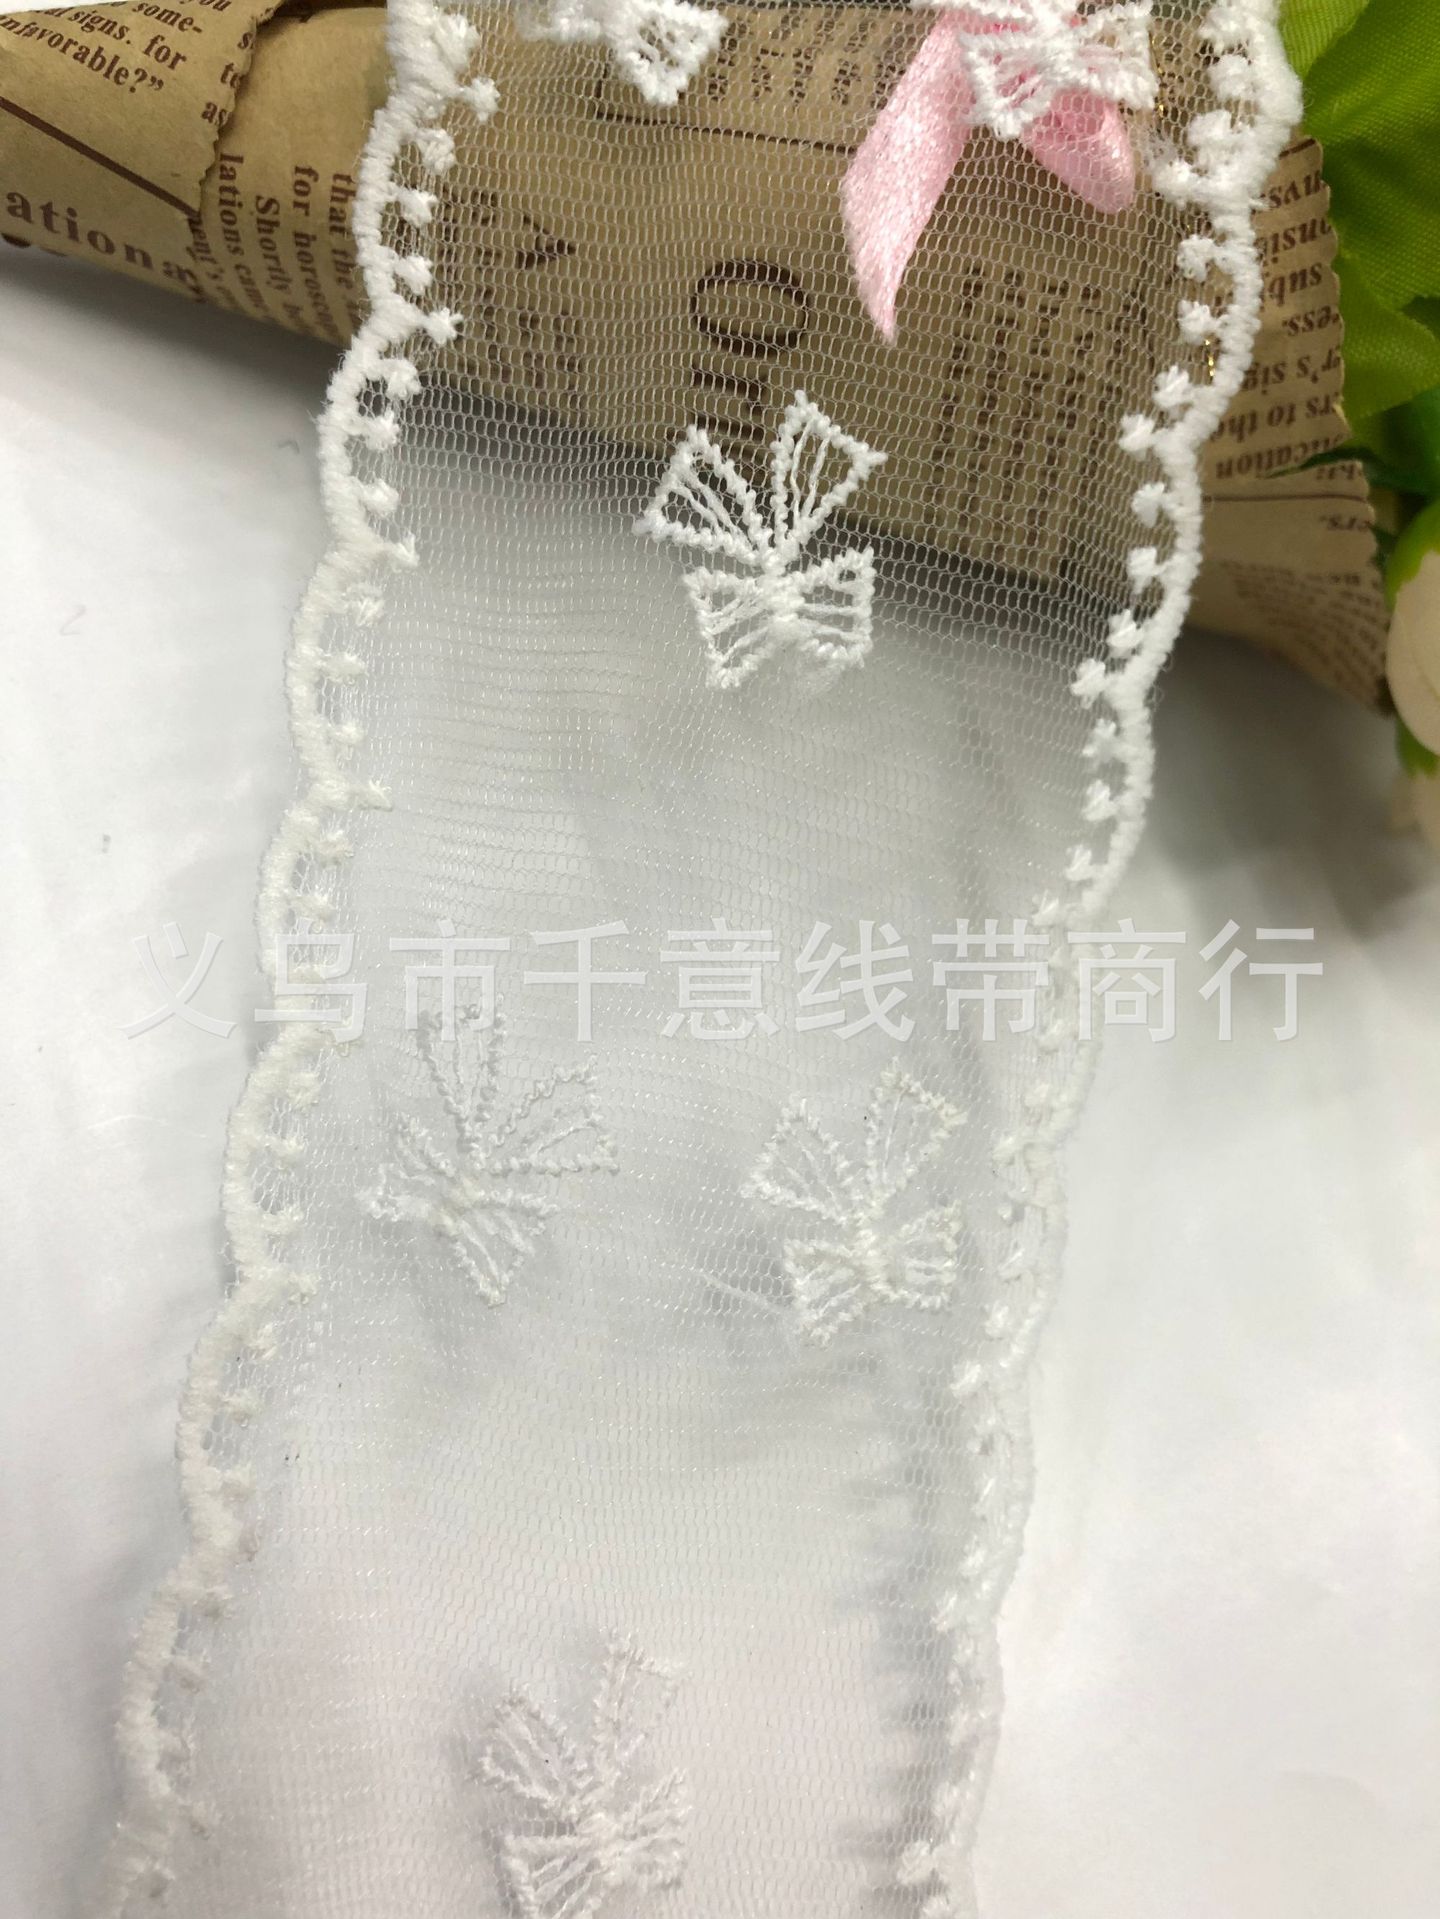 Products in Stock New Embroidery Lace Accessories Handmade DIY Hair Accessories Home Bedding Clothing Curtain Fabric Lace Material